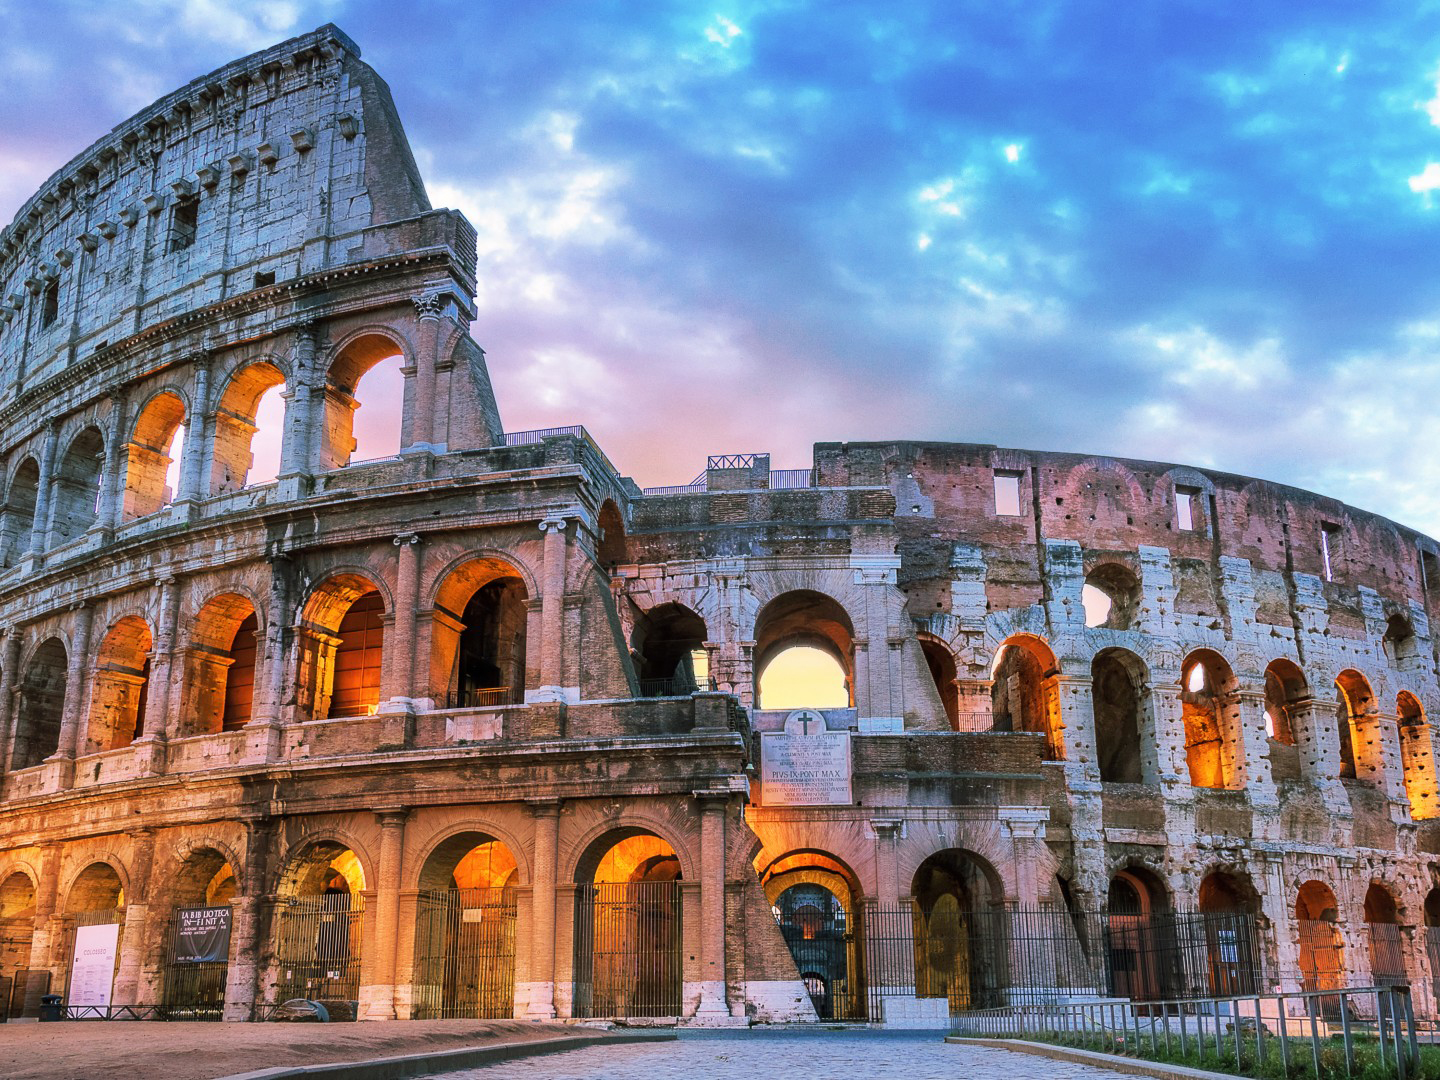 Most Popular Tourist Attractions in Italy - Marvel at the Colosseum in Rome